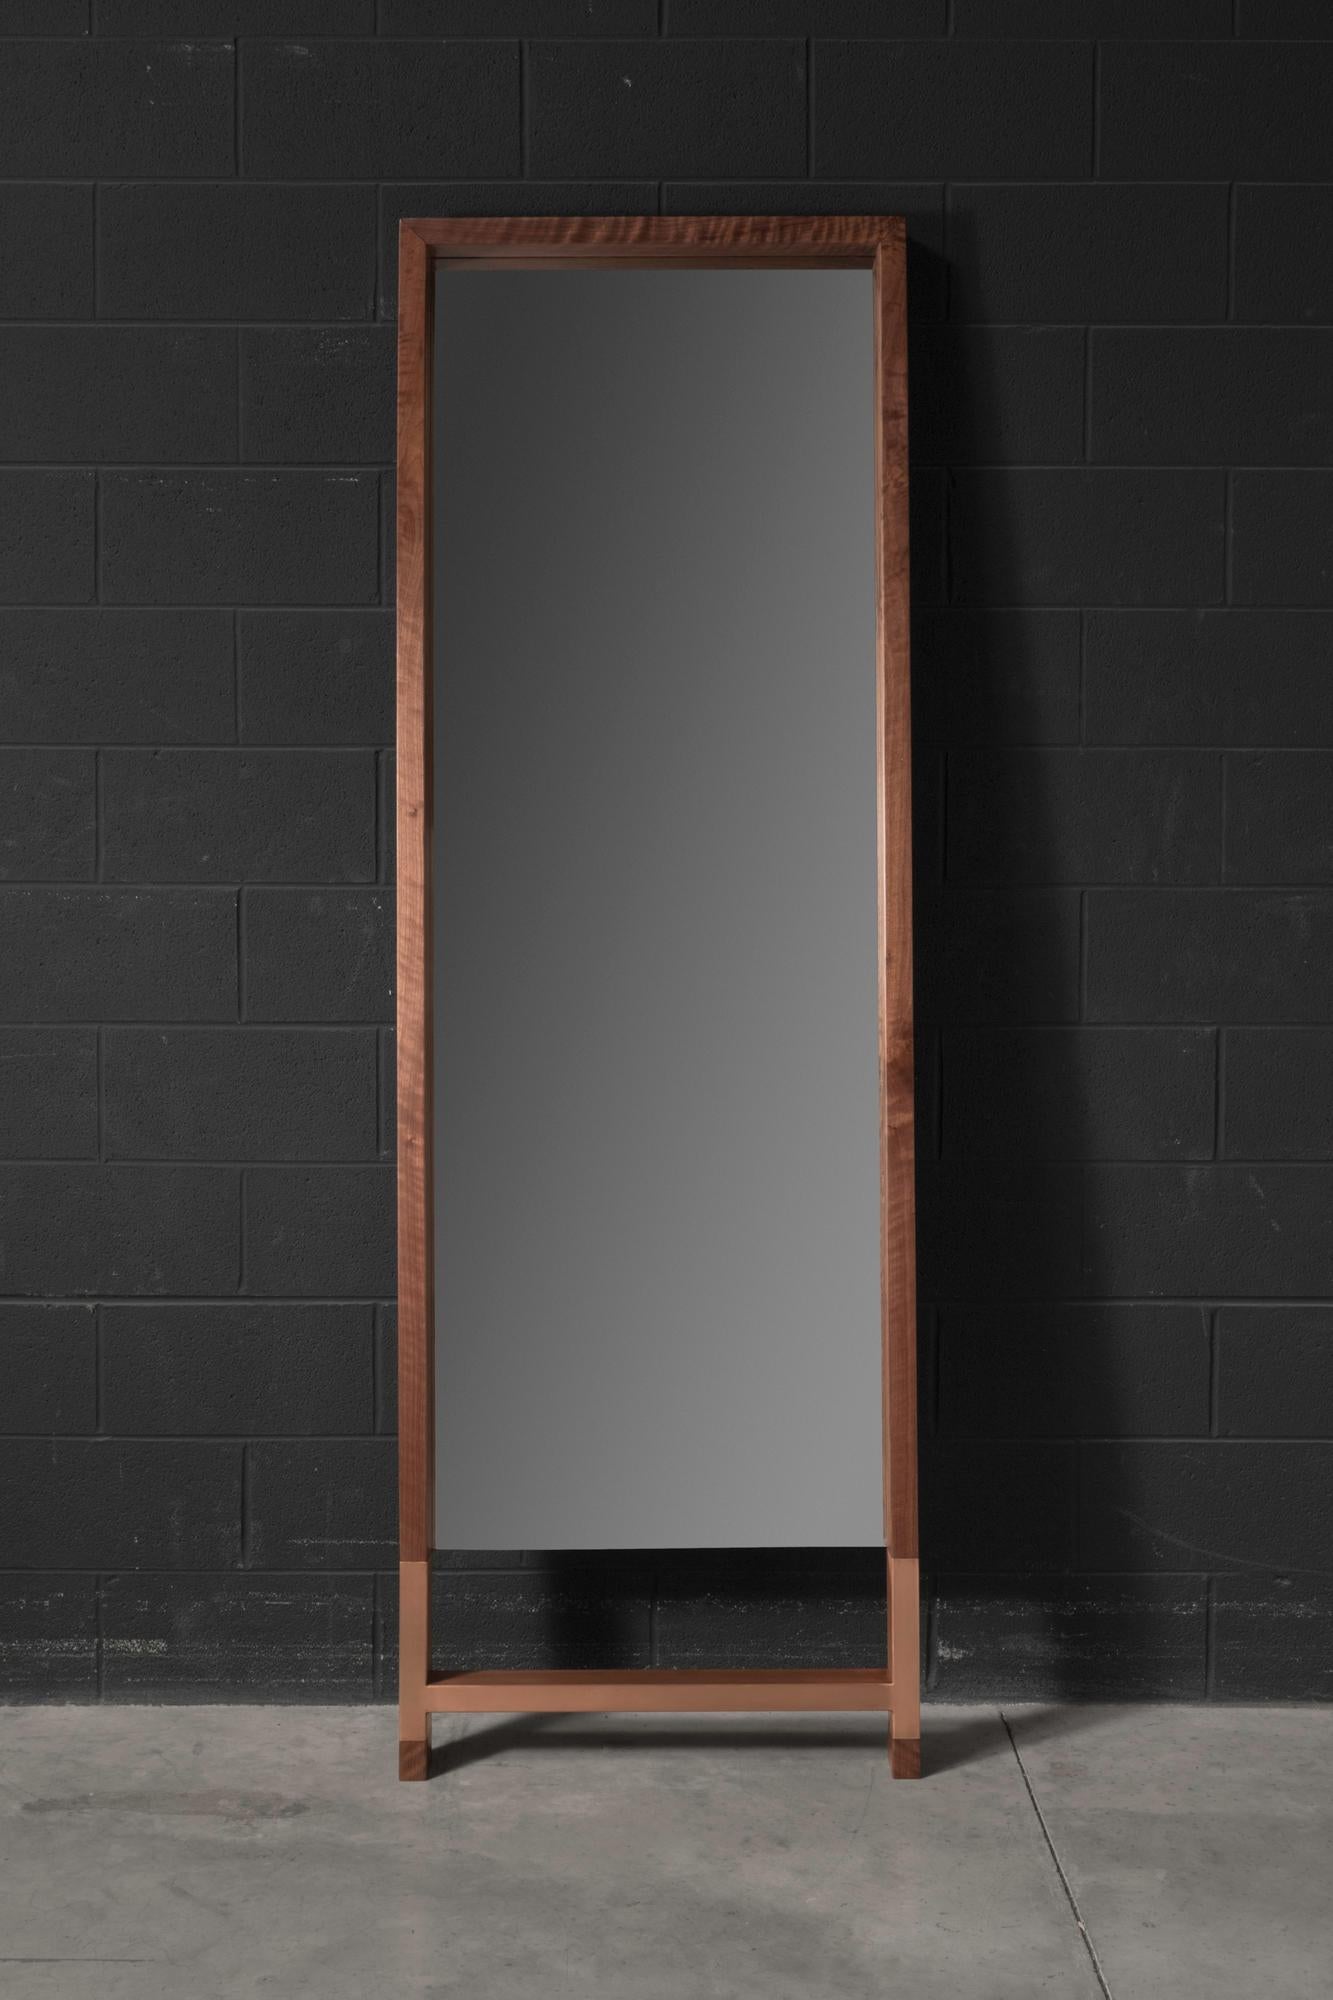 The Madison standing mirror is made of solid American walnut with a copper-plated metal base. The way the tones of the copper and walnut enhance one another makes the Madison standing mirror stand out as a modern and sleek mirror that will fit many